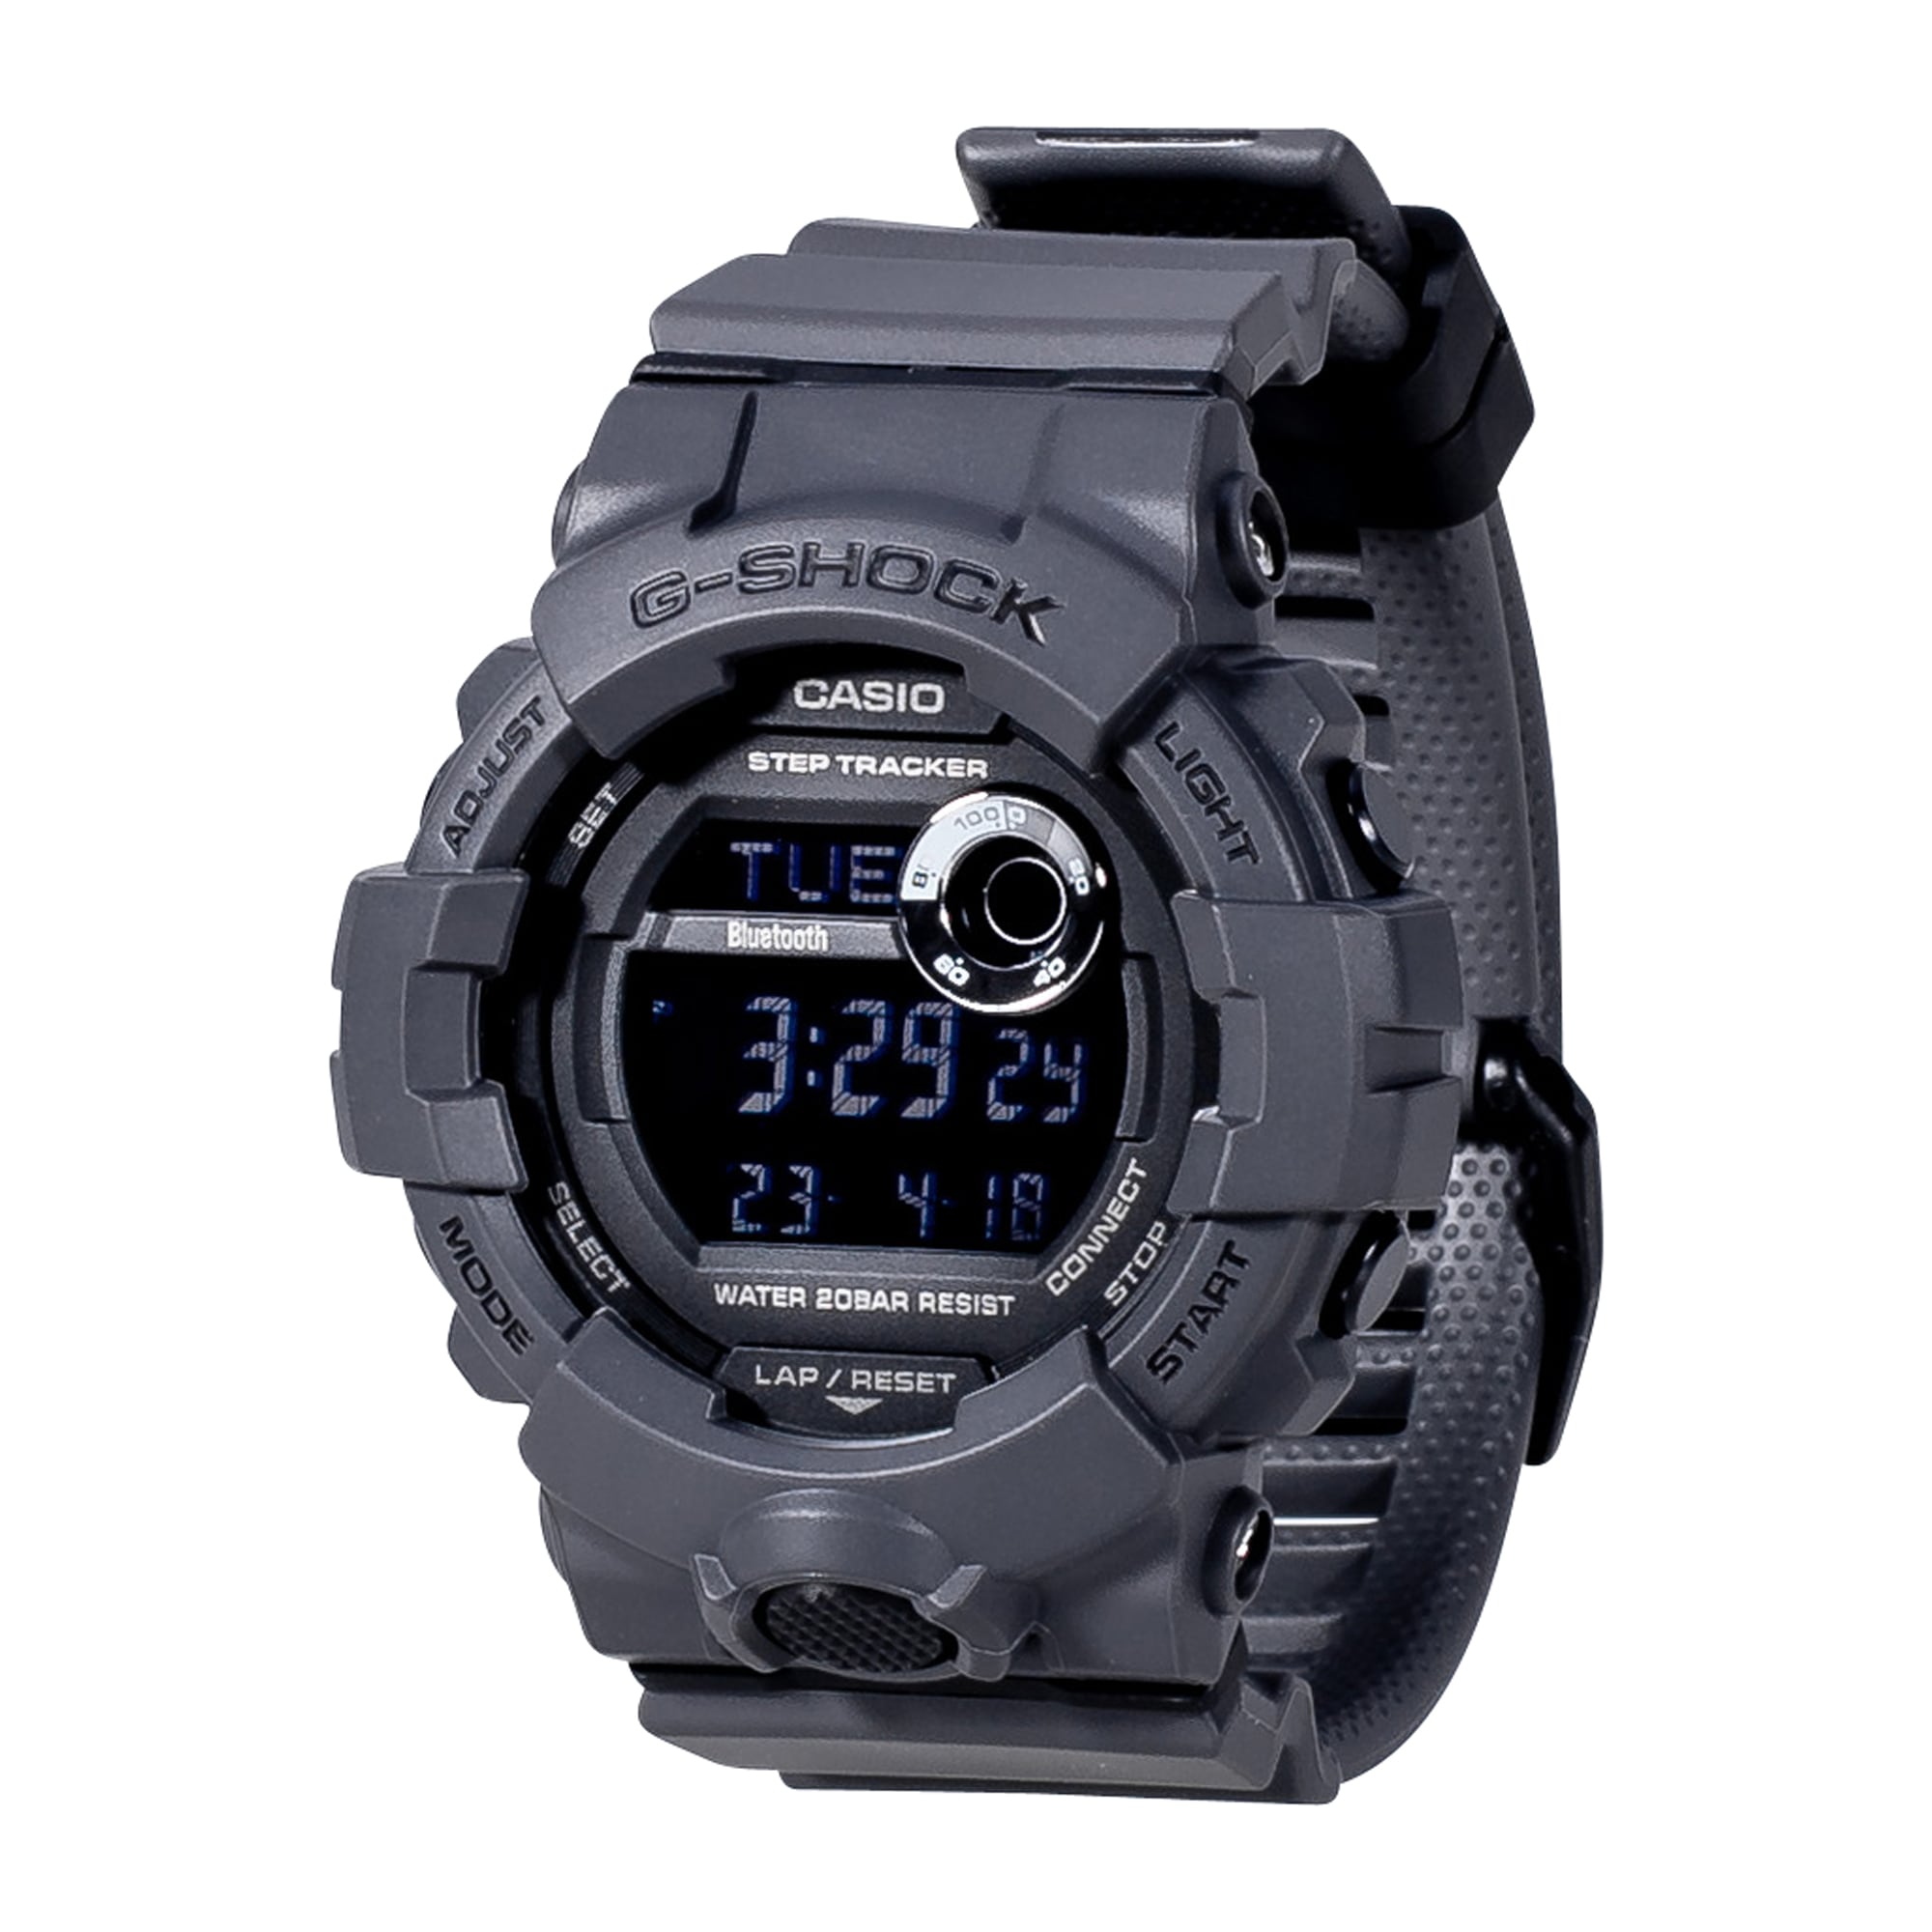 Purchase the Casio G-Shock G-Squad GBD-800UC-8ER Watch black by